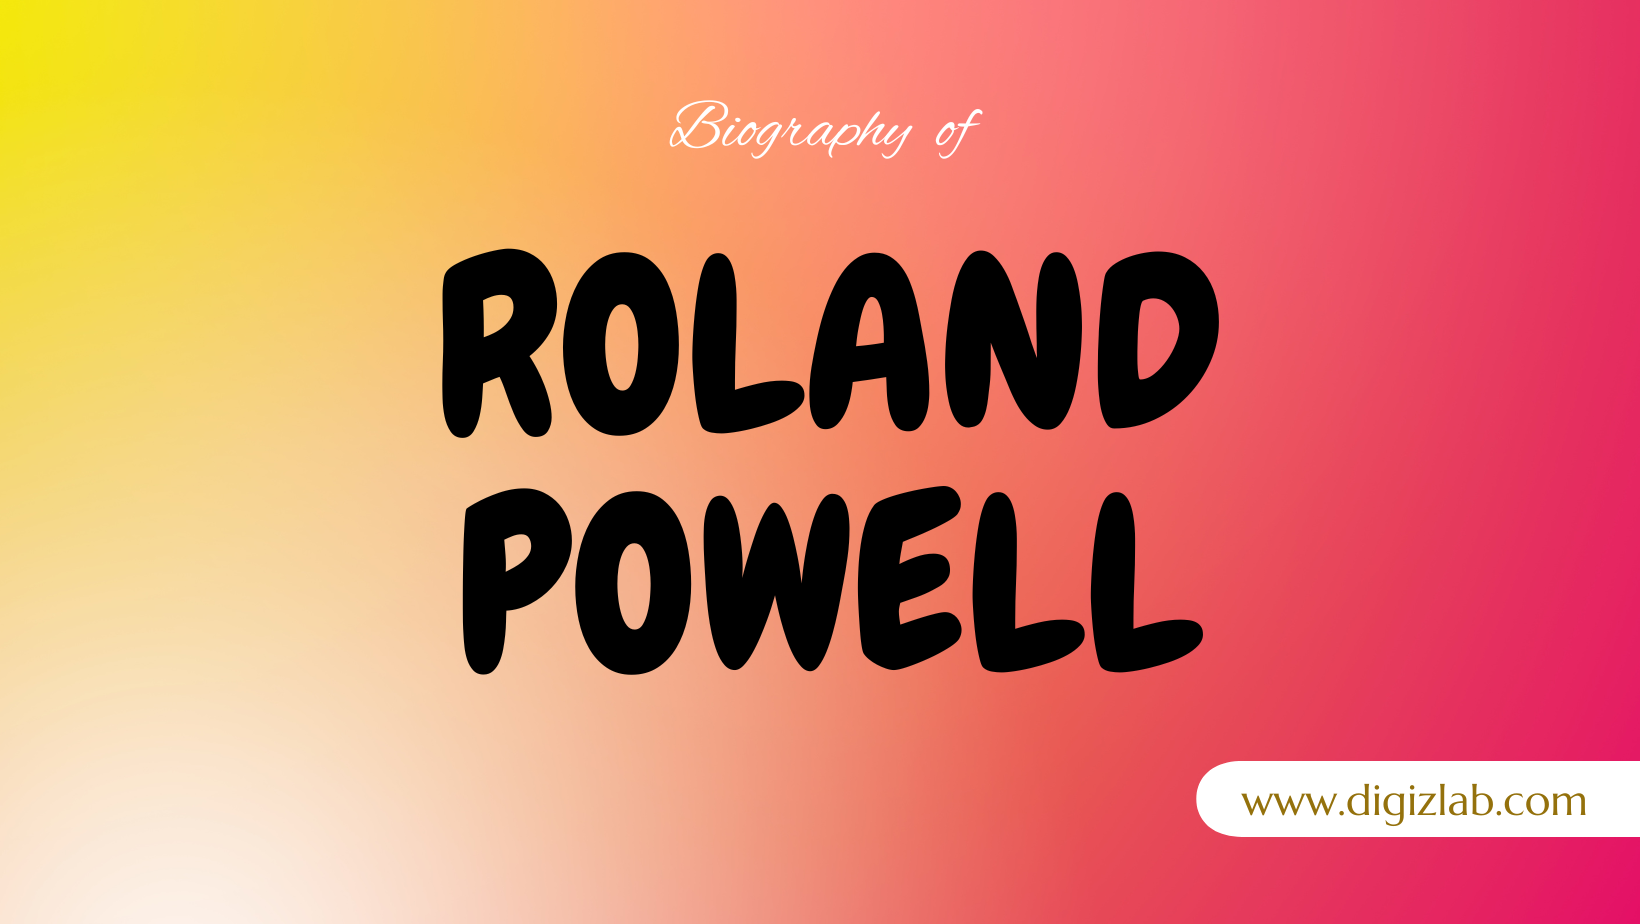 Roland Powell Net Worth, Wife, Age, Height, Weight, Wiki